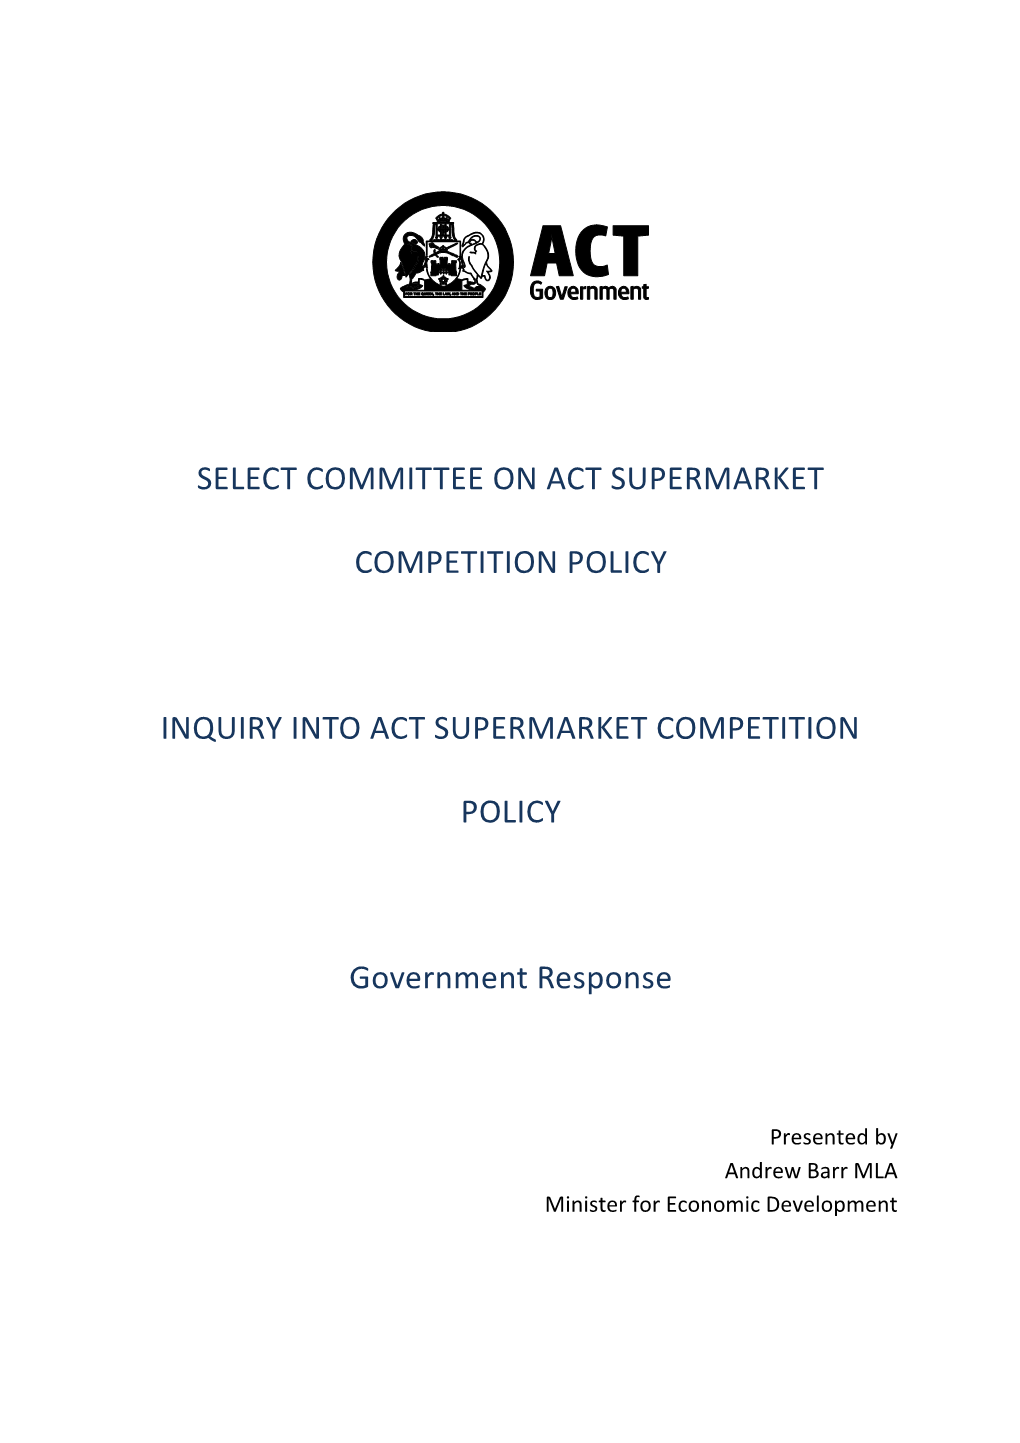 Select Committee on Act Supermarket Competition Policy